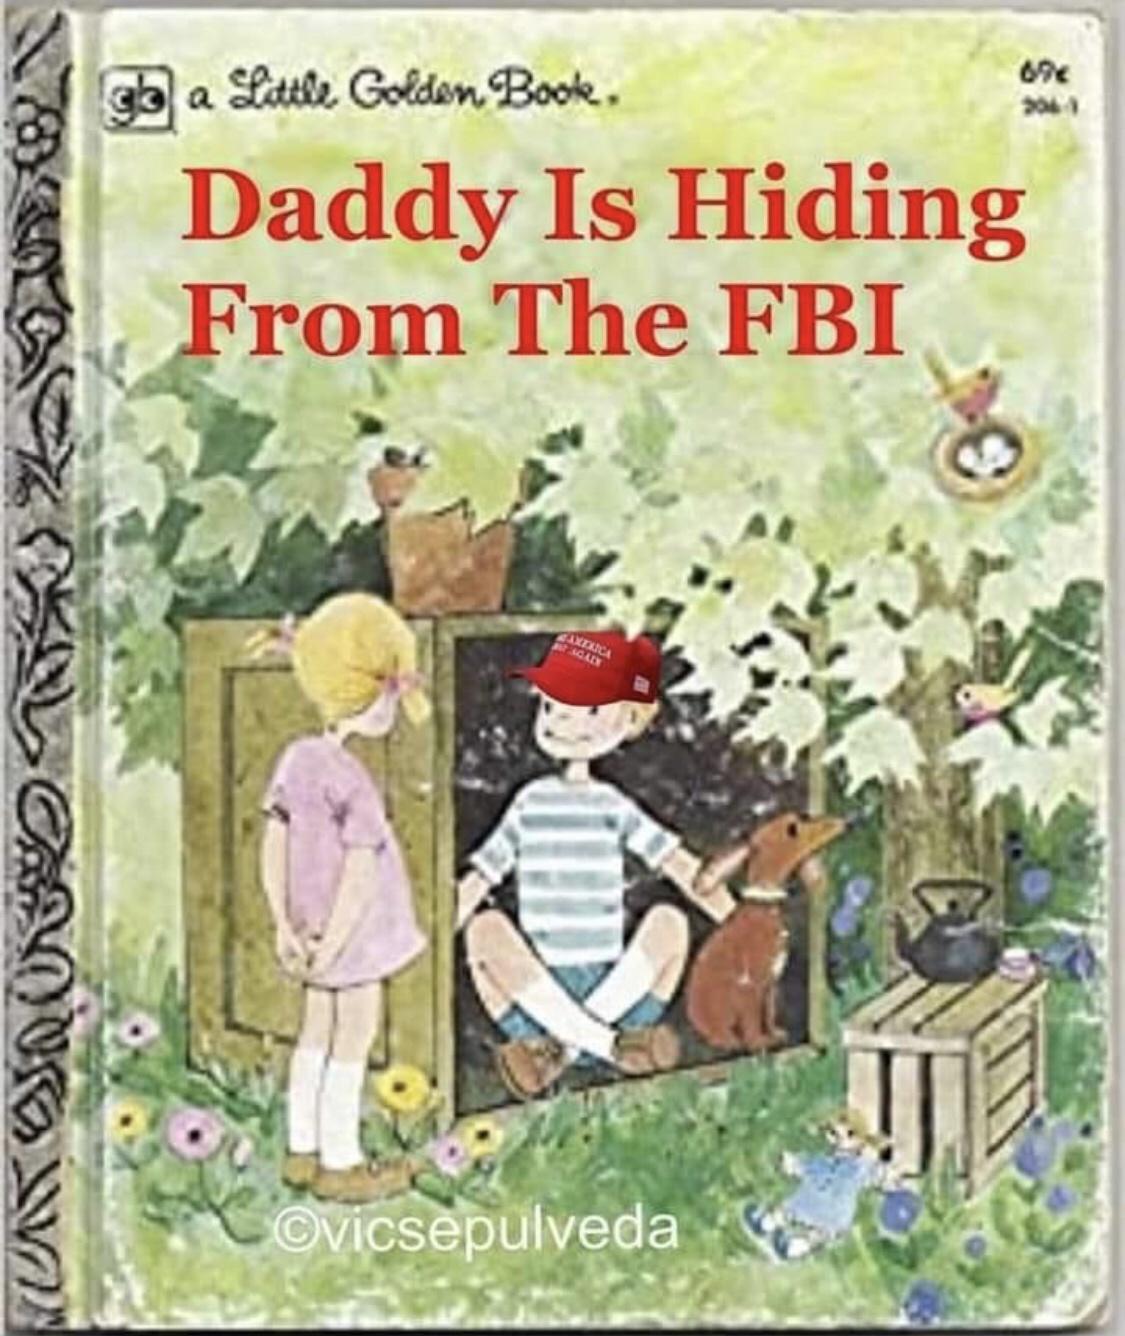 little golden book my home - 69 sb a Slittle Golden Boole. Daddy Is Hiding From The Fbi Faxtrica vicsepulveda